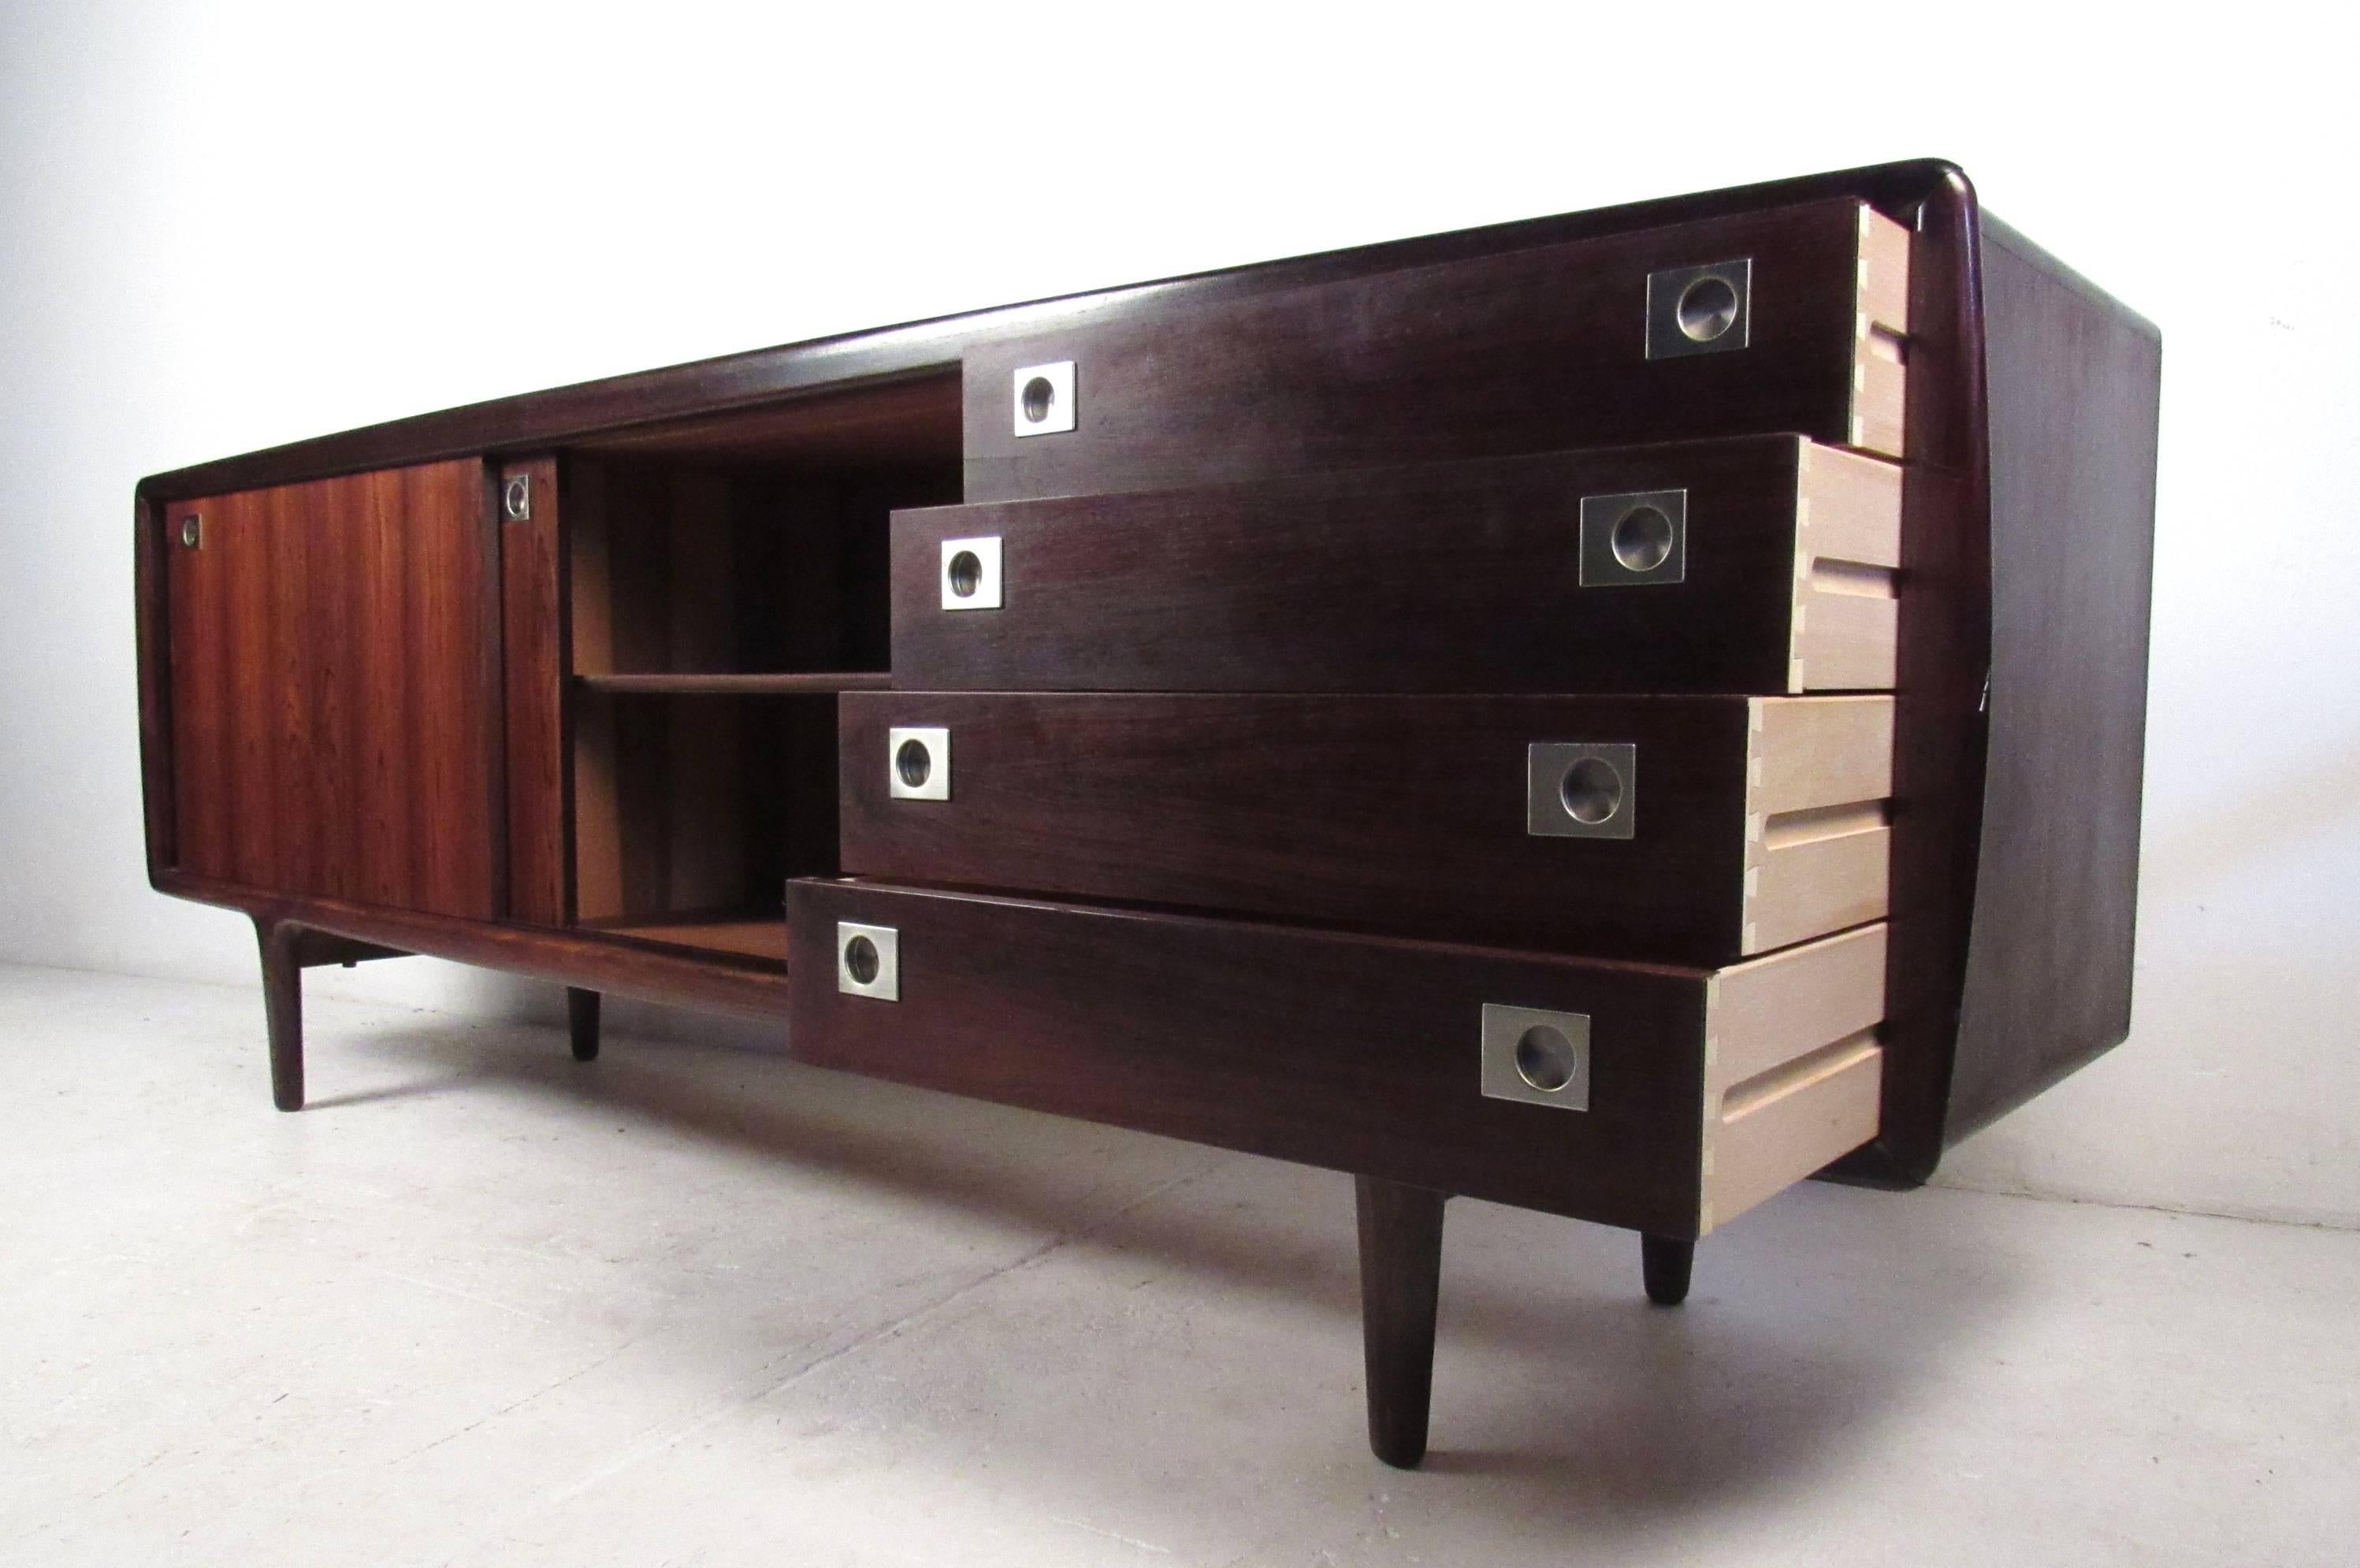 This stunning long vintage modern sideboard features unique recessed chrome pulls and sculpted tapered legs. Sleek Danish design by H.P. Hansen with elegant rosewood grain and clean lines. Four large drawers and two large compartments are hidden by